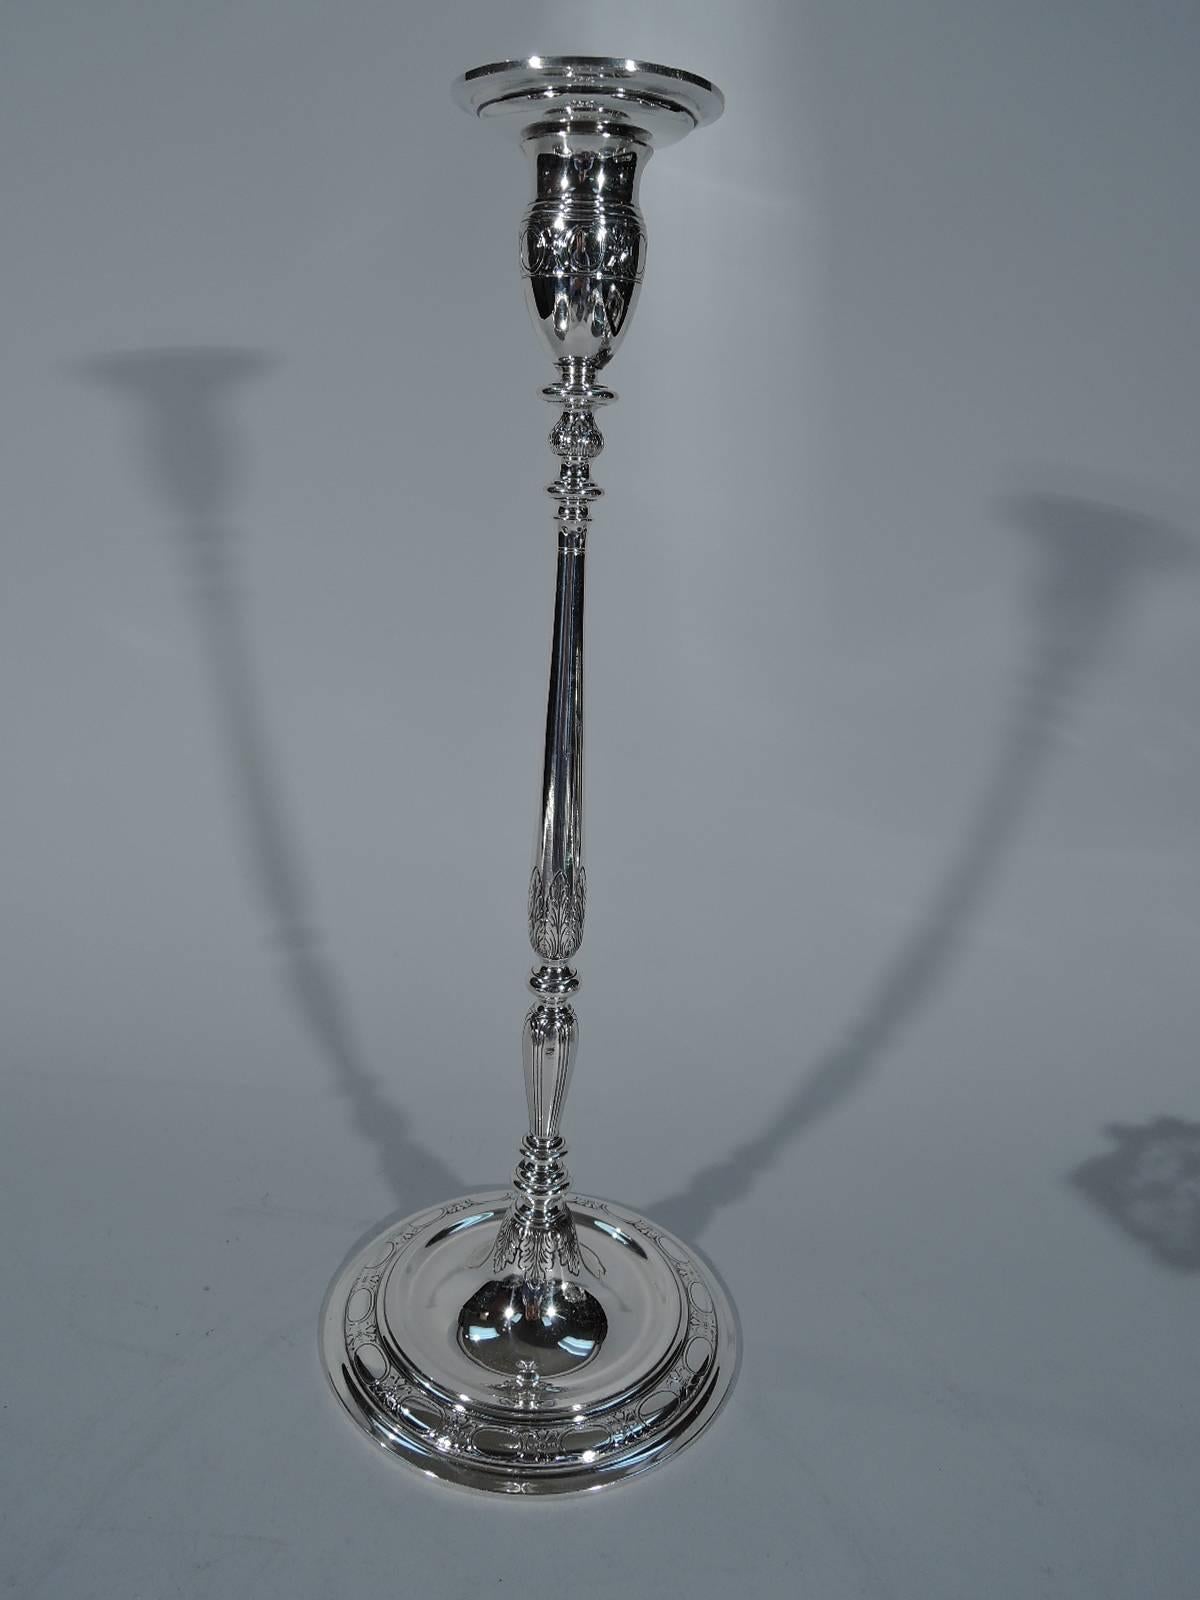 Pair of Modern sterling silver candlesticks. Made by Tiffany & Co. in New York, circa 1925. Each: Unusual attenuated form with knopped double baluster shaft on domed foot. Oval socket with detachable bobeche. Leaves and bands of stylized flowers